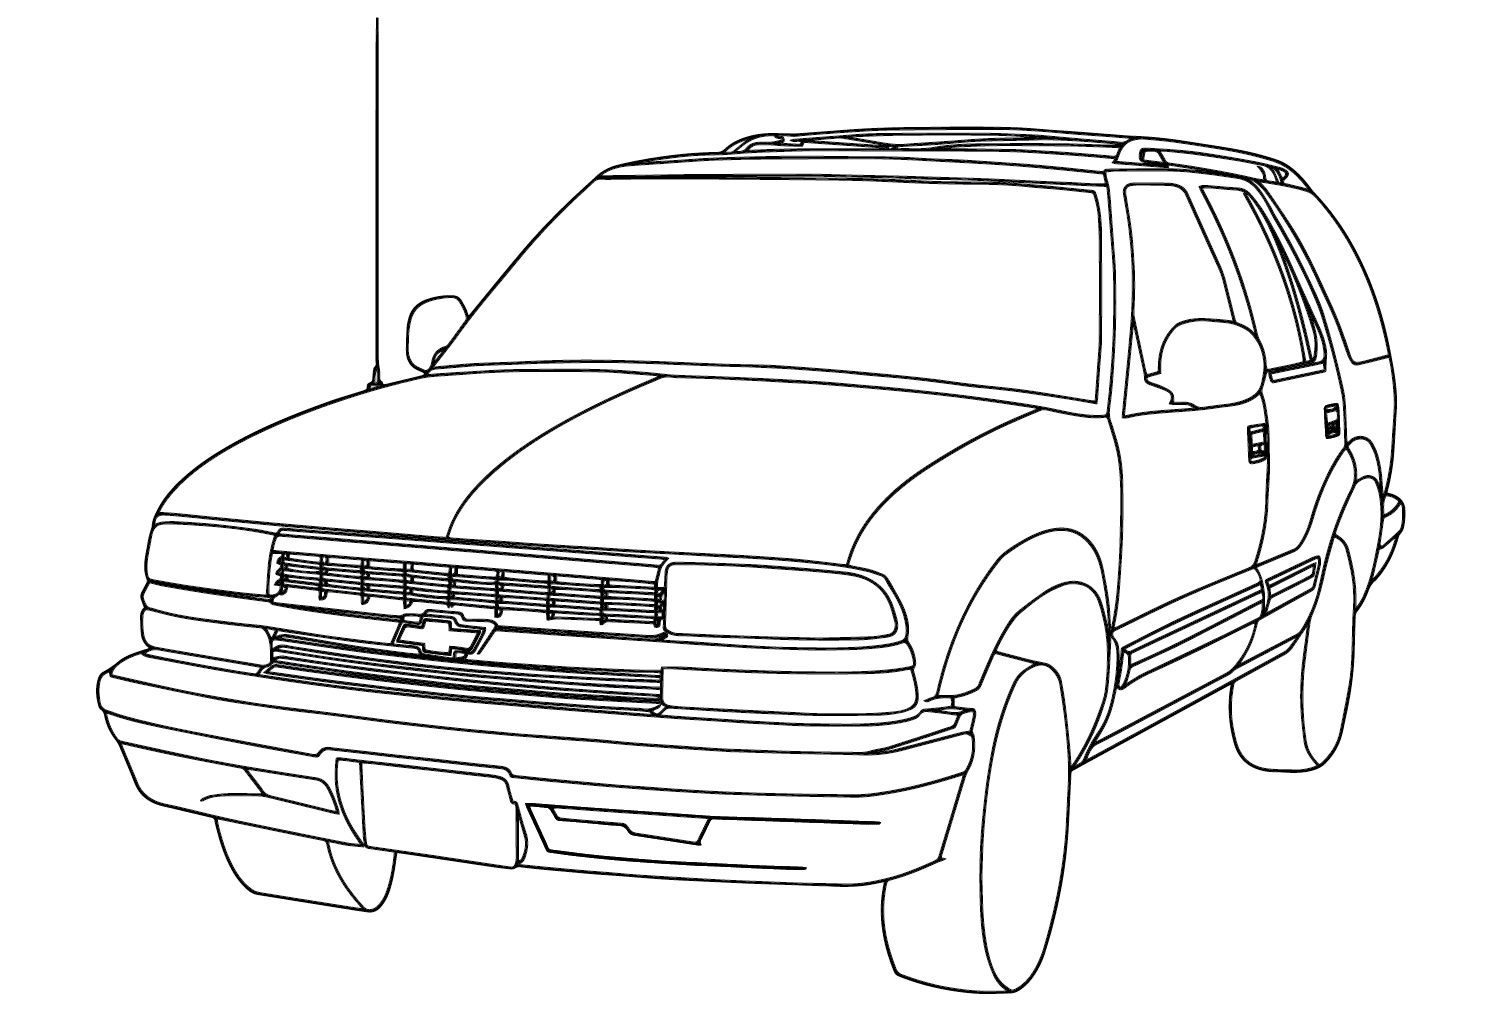 Chevrolet Blazer Coloring Page - Free Printable Coloring Pages